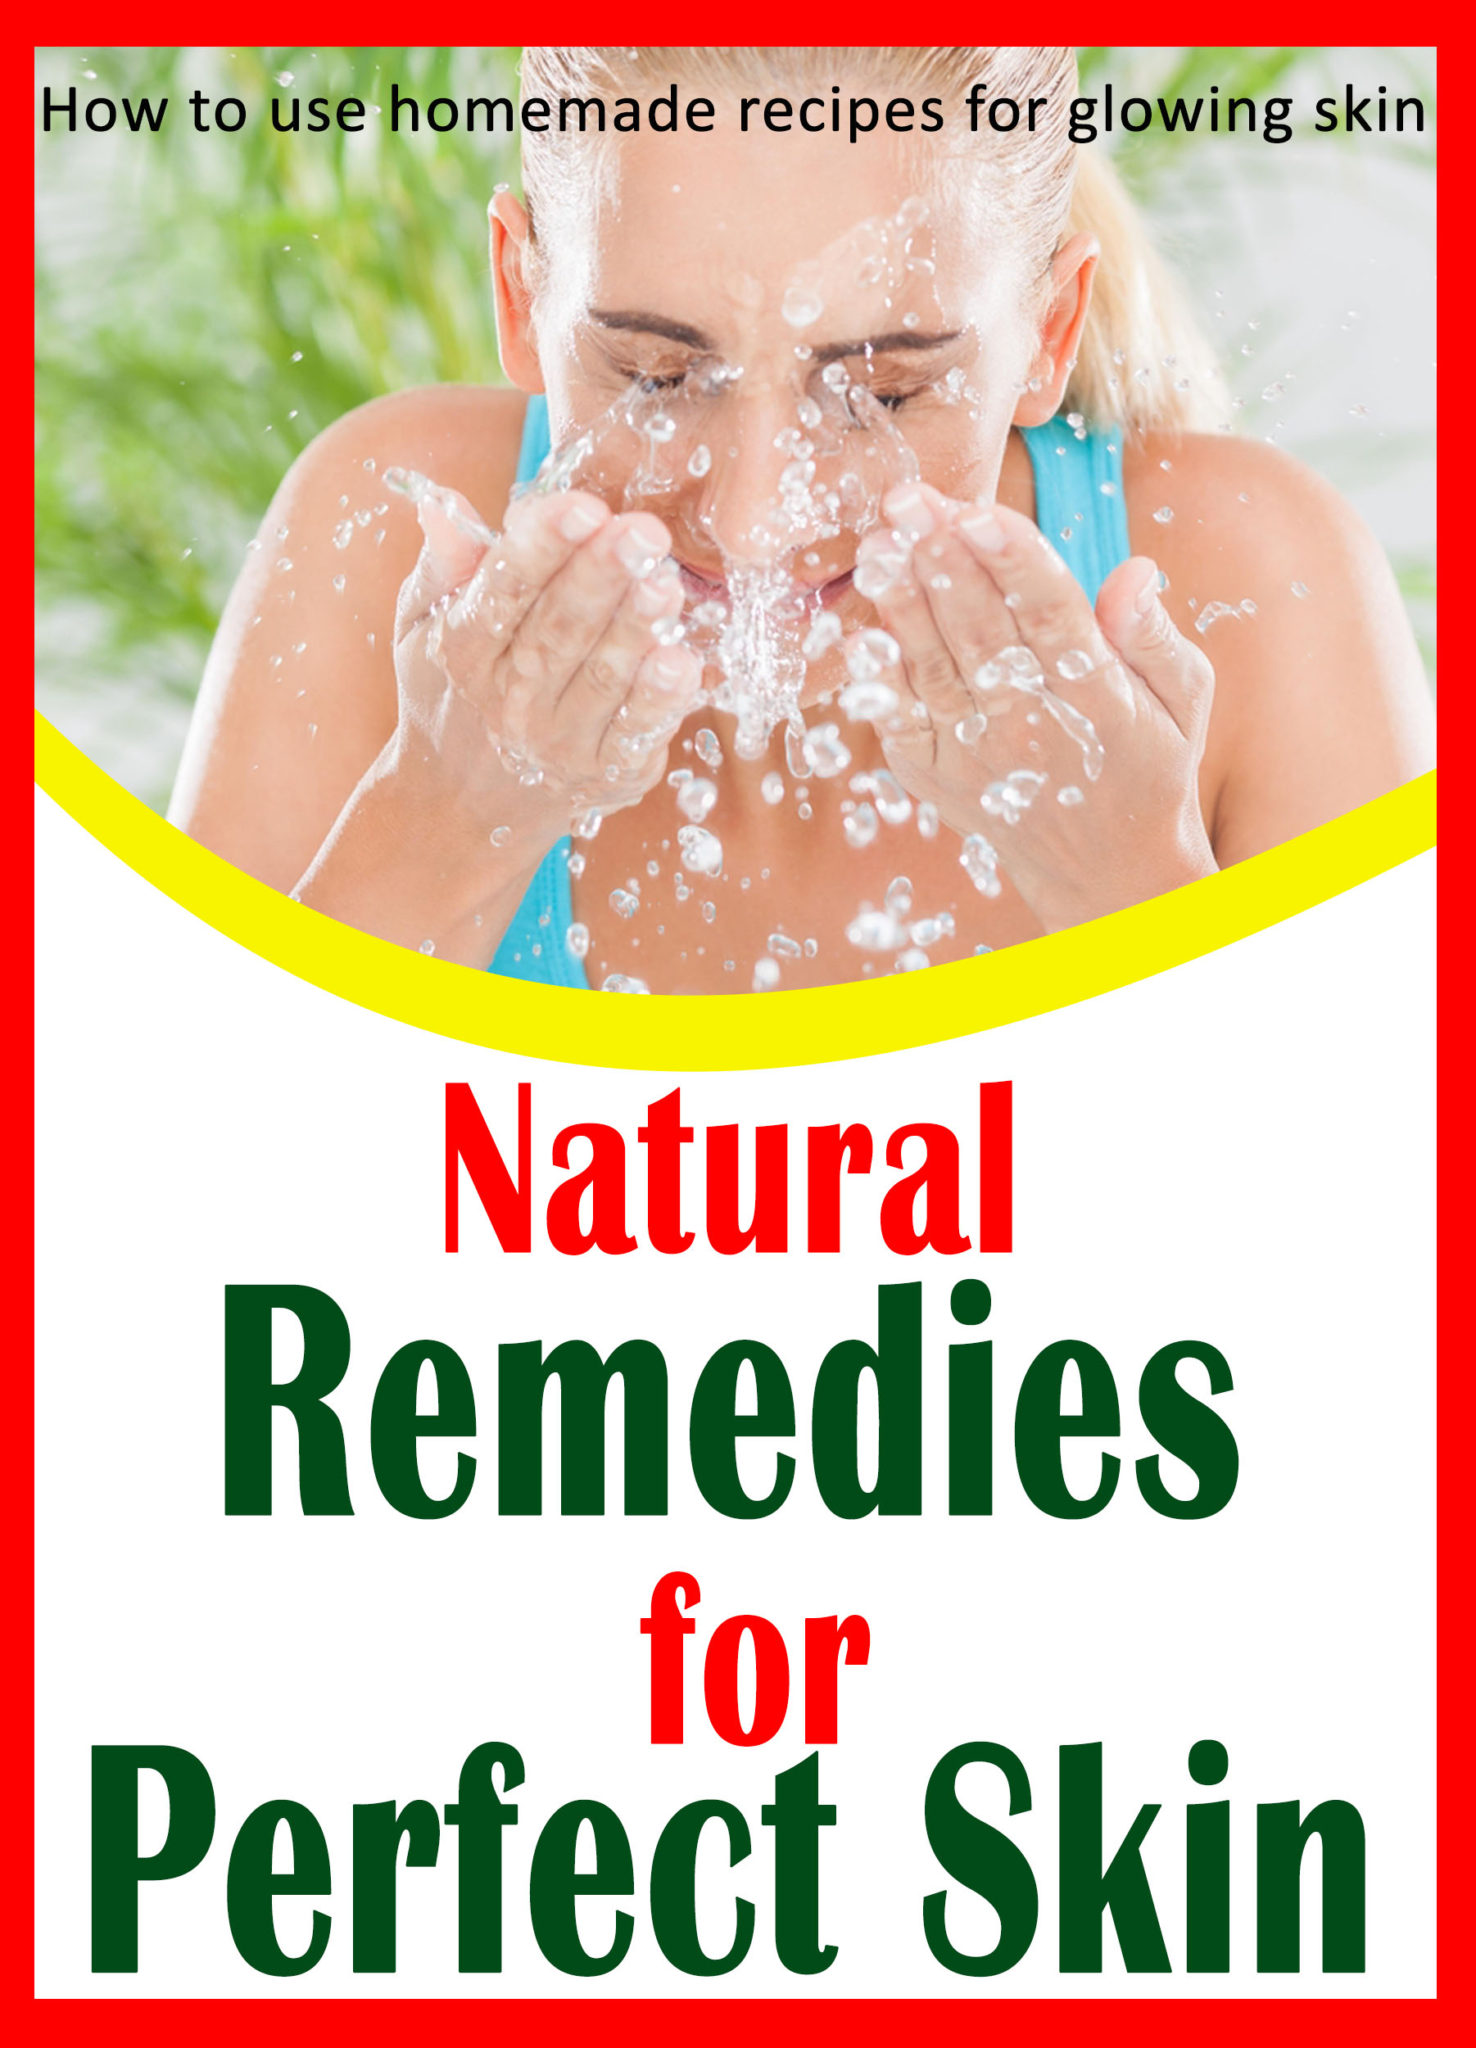 FREE: NATURAL REMEDIES FOR A PERFECT SKIN by Jane Price